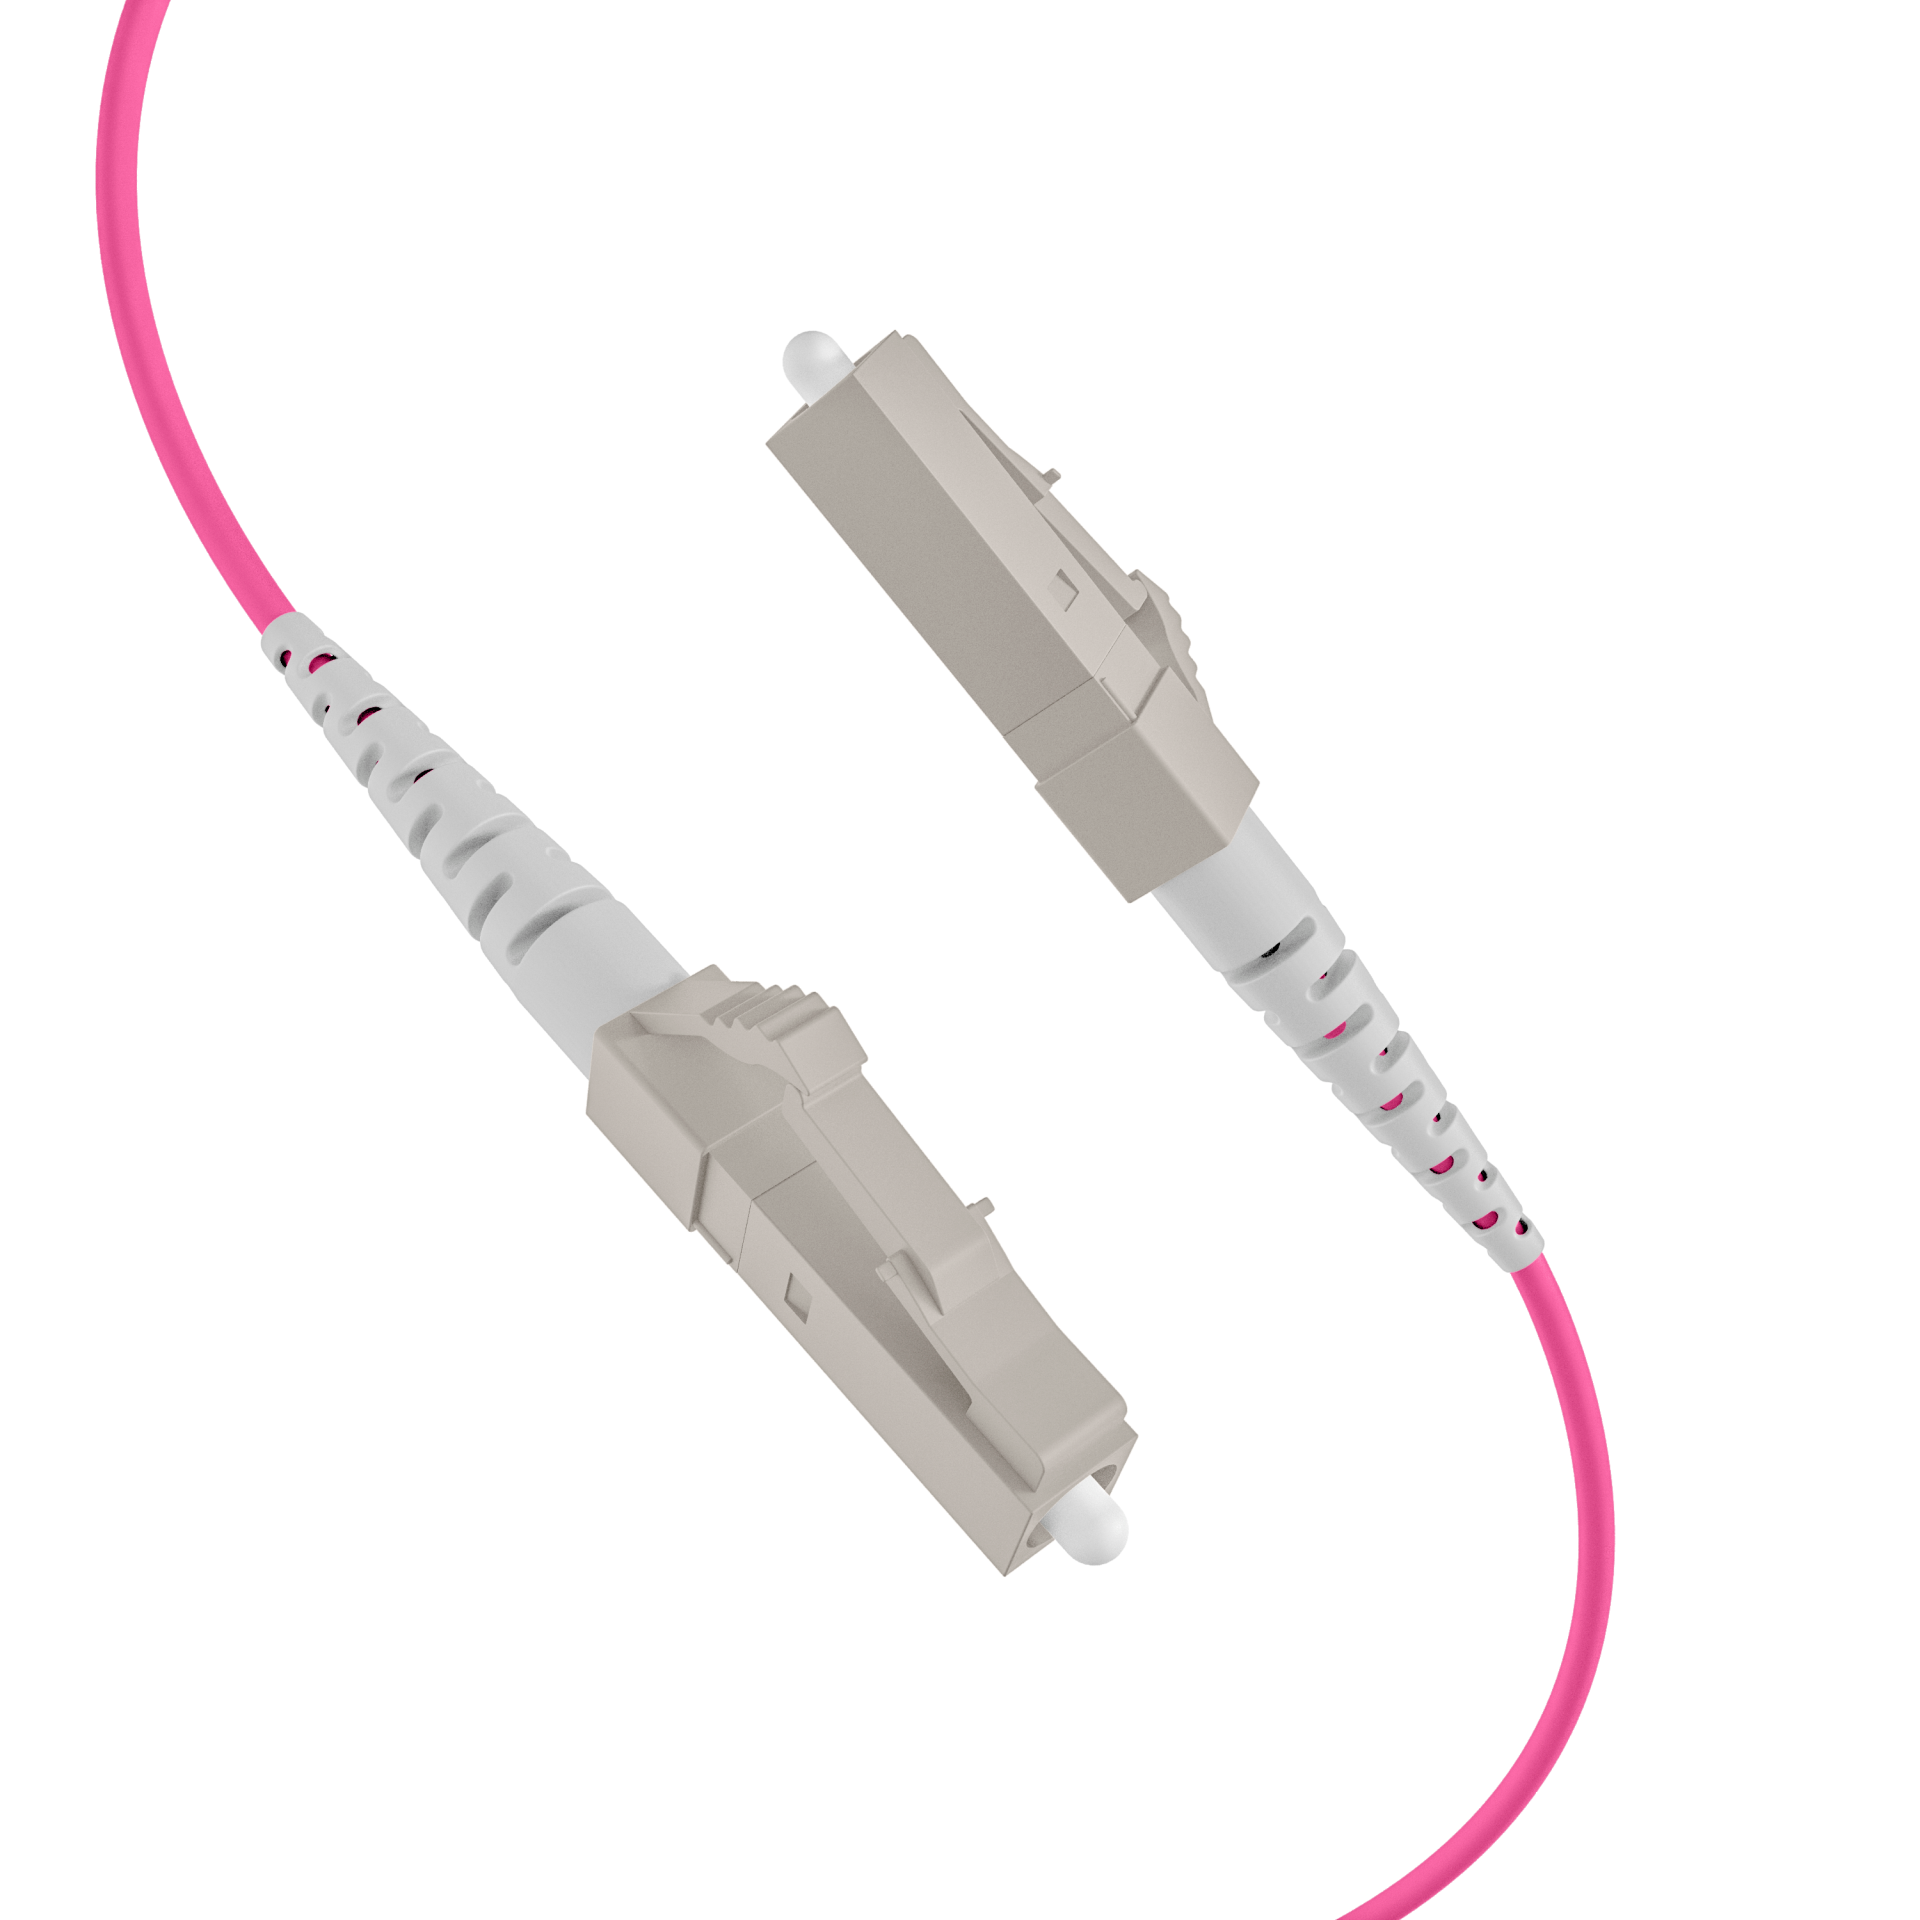 Trunkcable U-DQ(ZN)BH OM4 8G (1x8) LC-LC,180m Dca LSZH